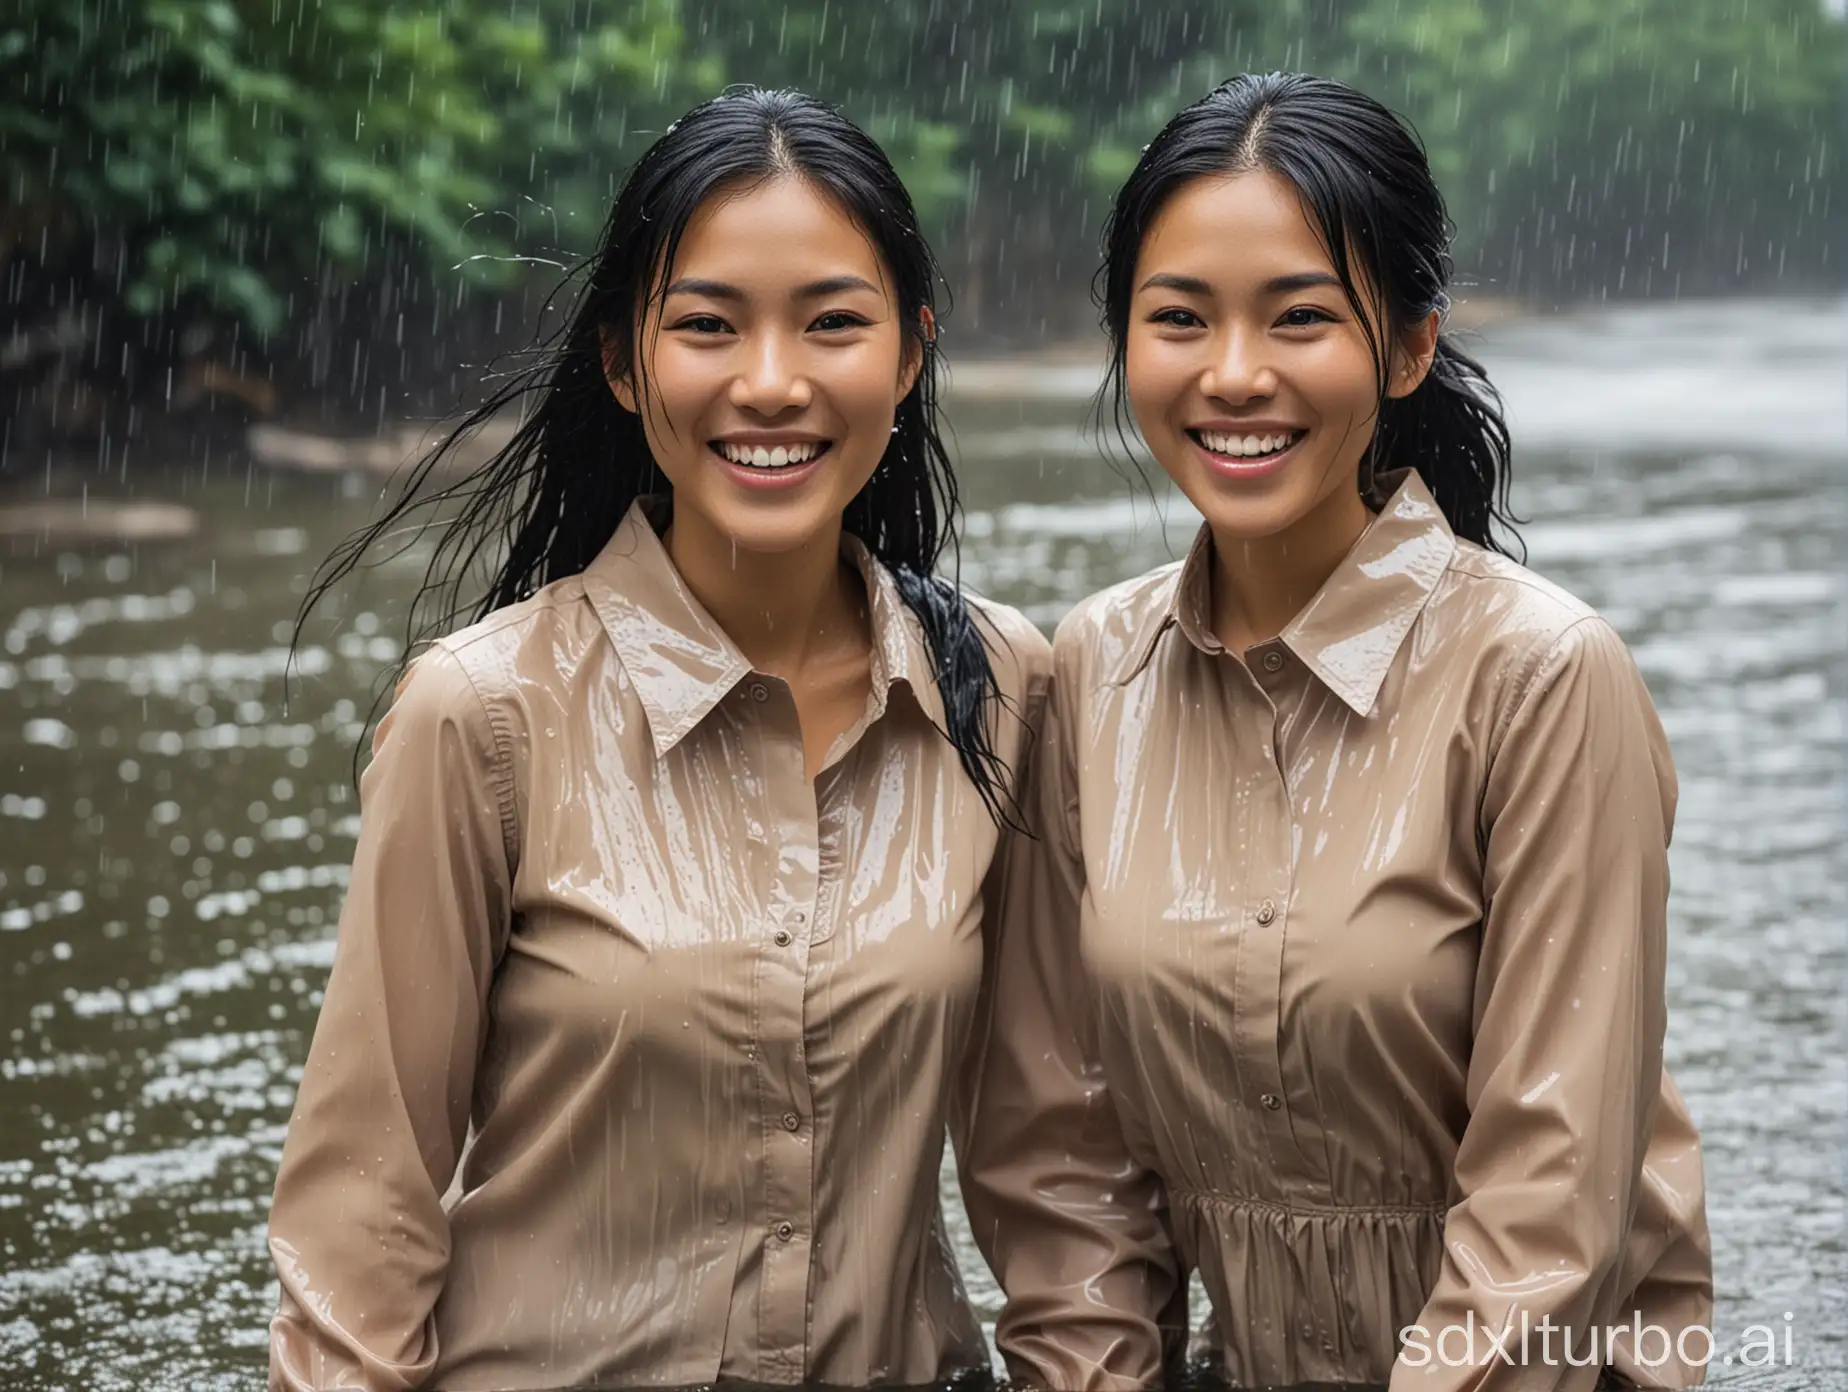 Two-Smiling-Women-in-Rainy-River